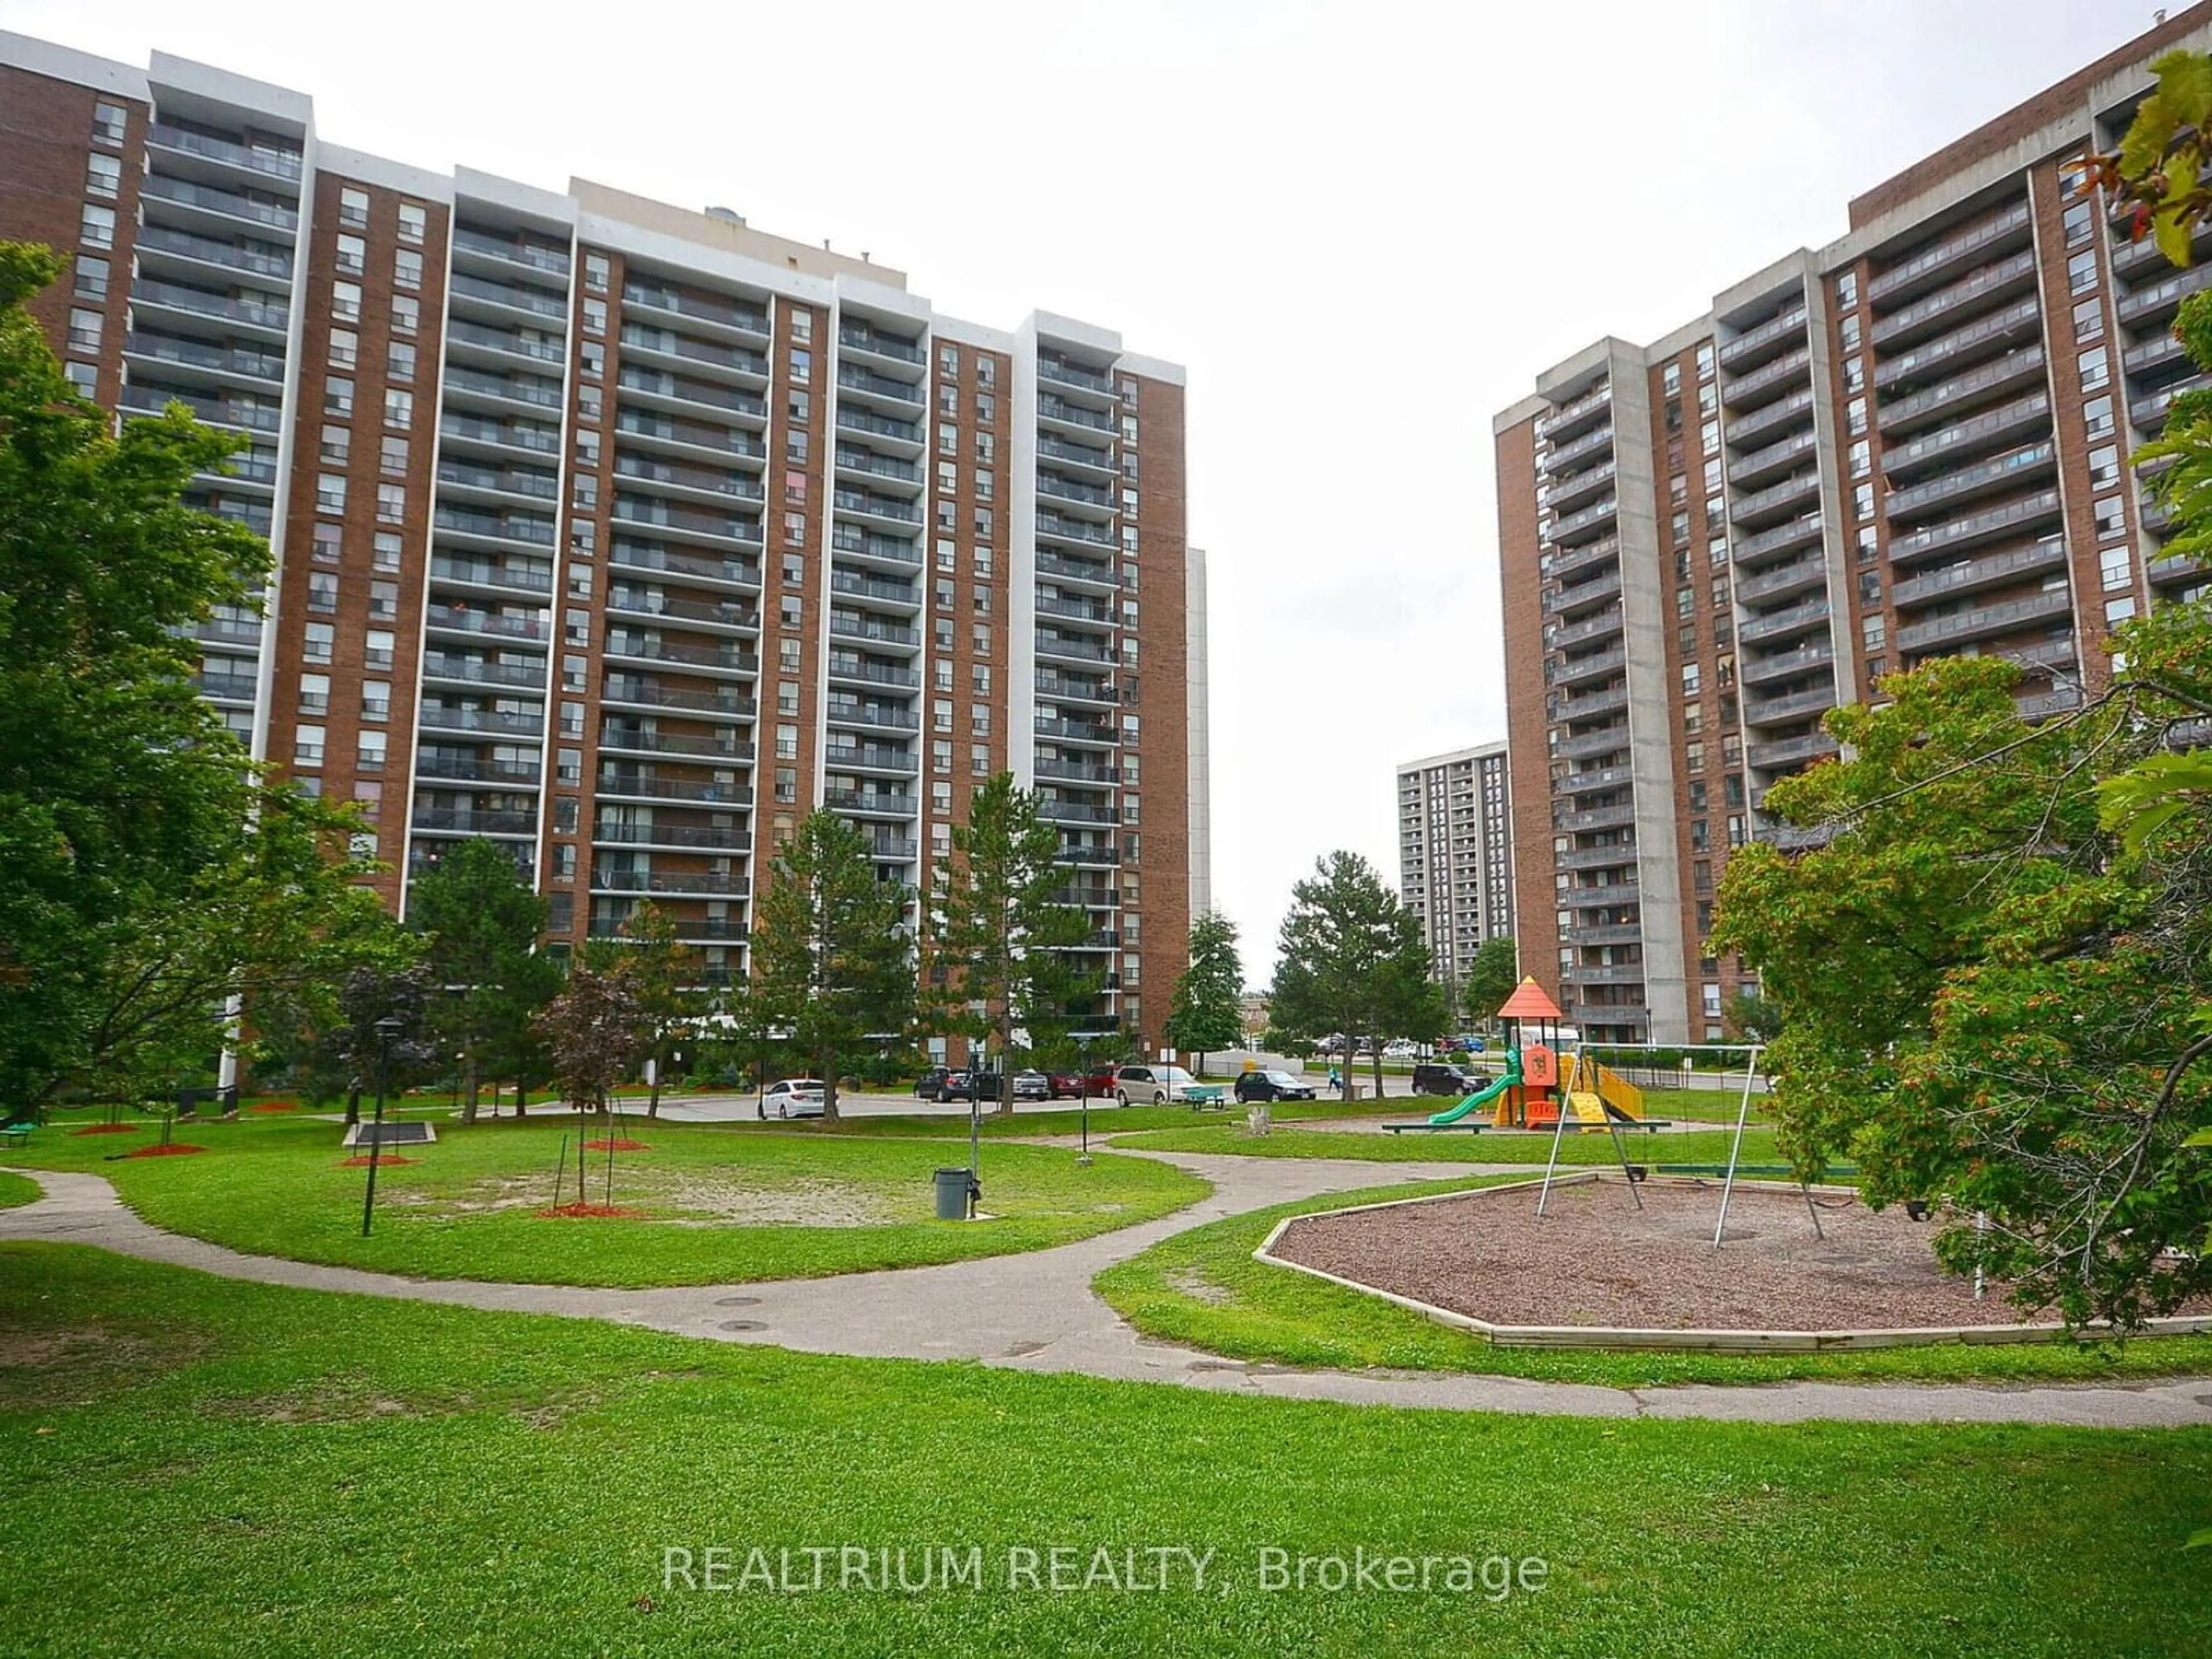 A pic from exterior of the house or condo for 21 Knightsbridge Rd #1209, Brampton Ontario L6T 3Y1